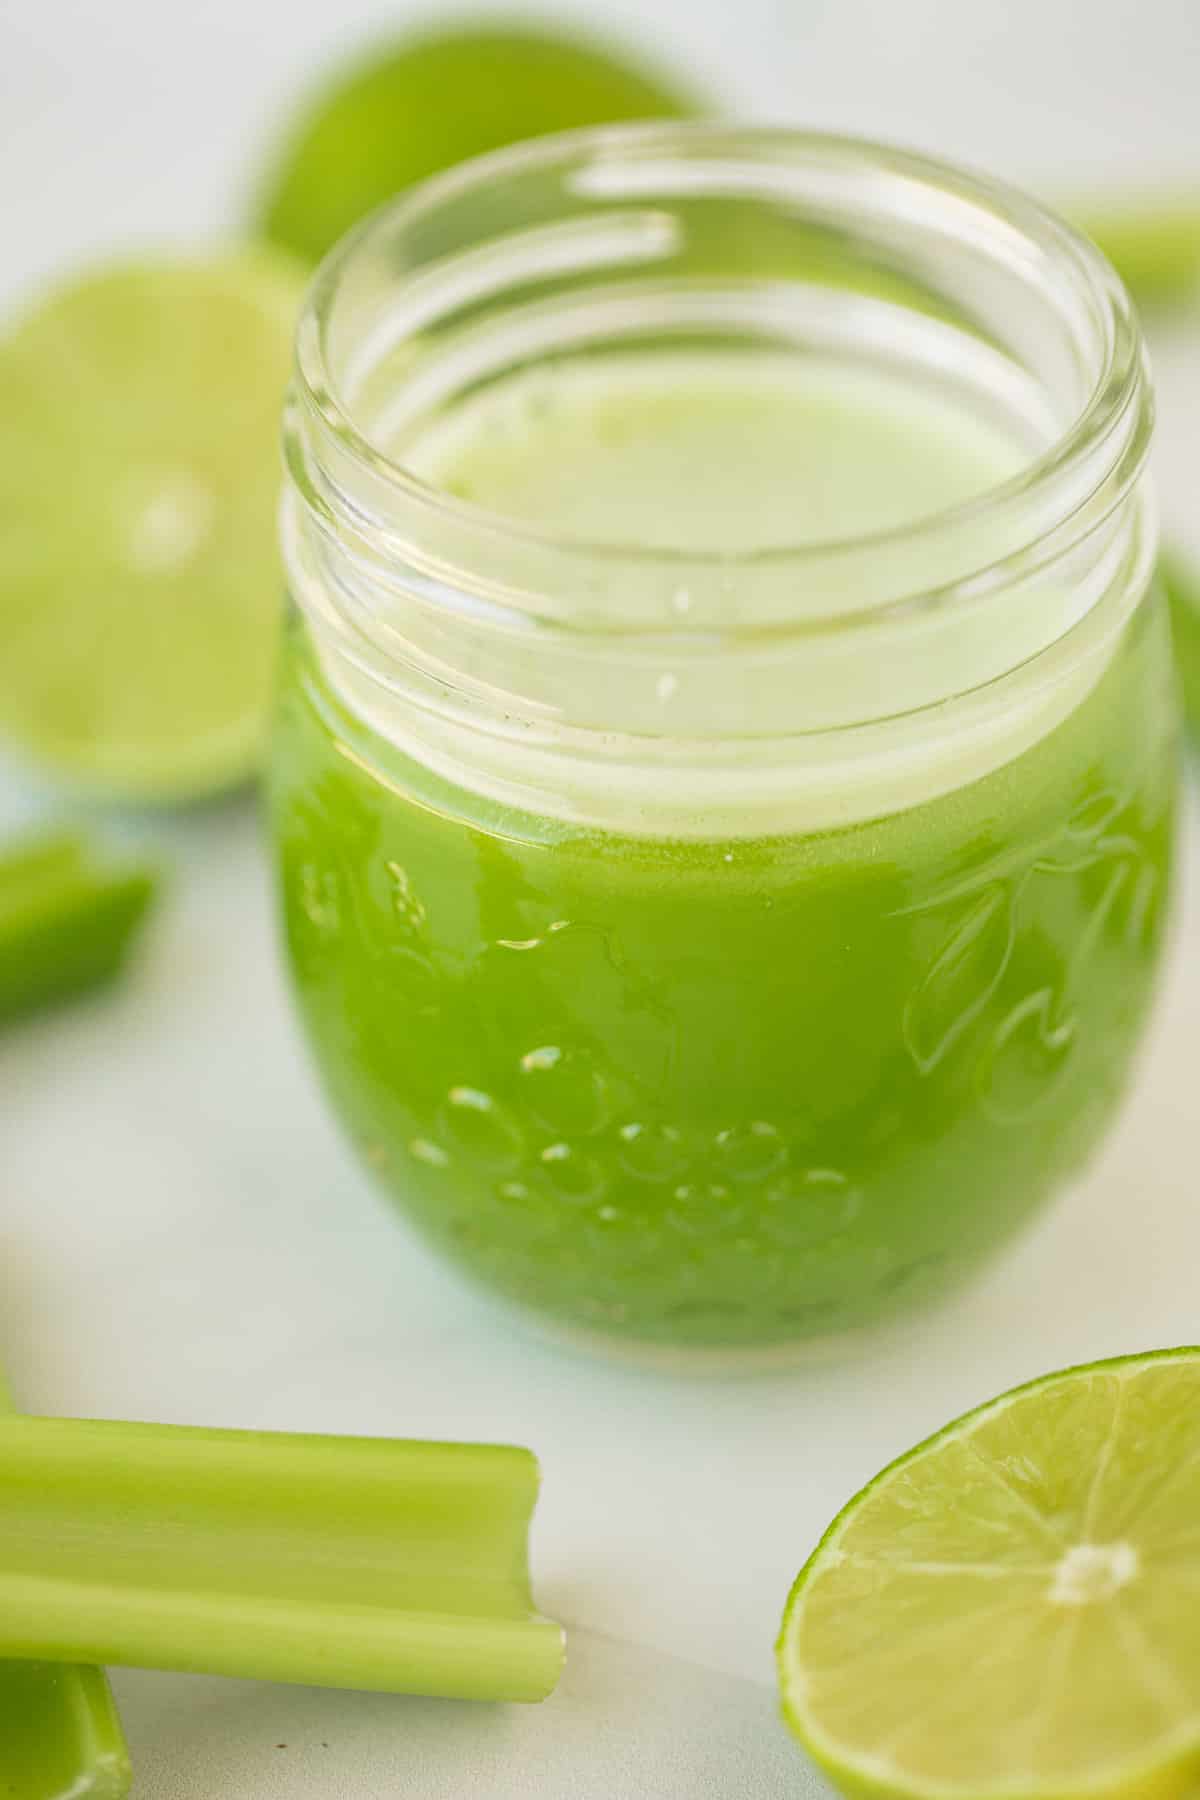 glass of celery juice on a table with celery and limes